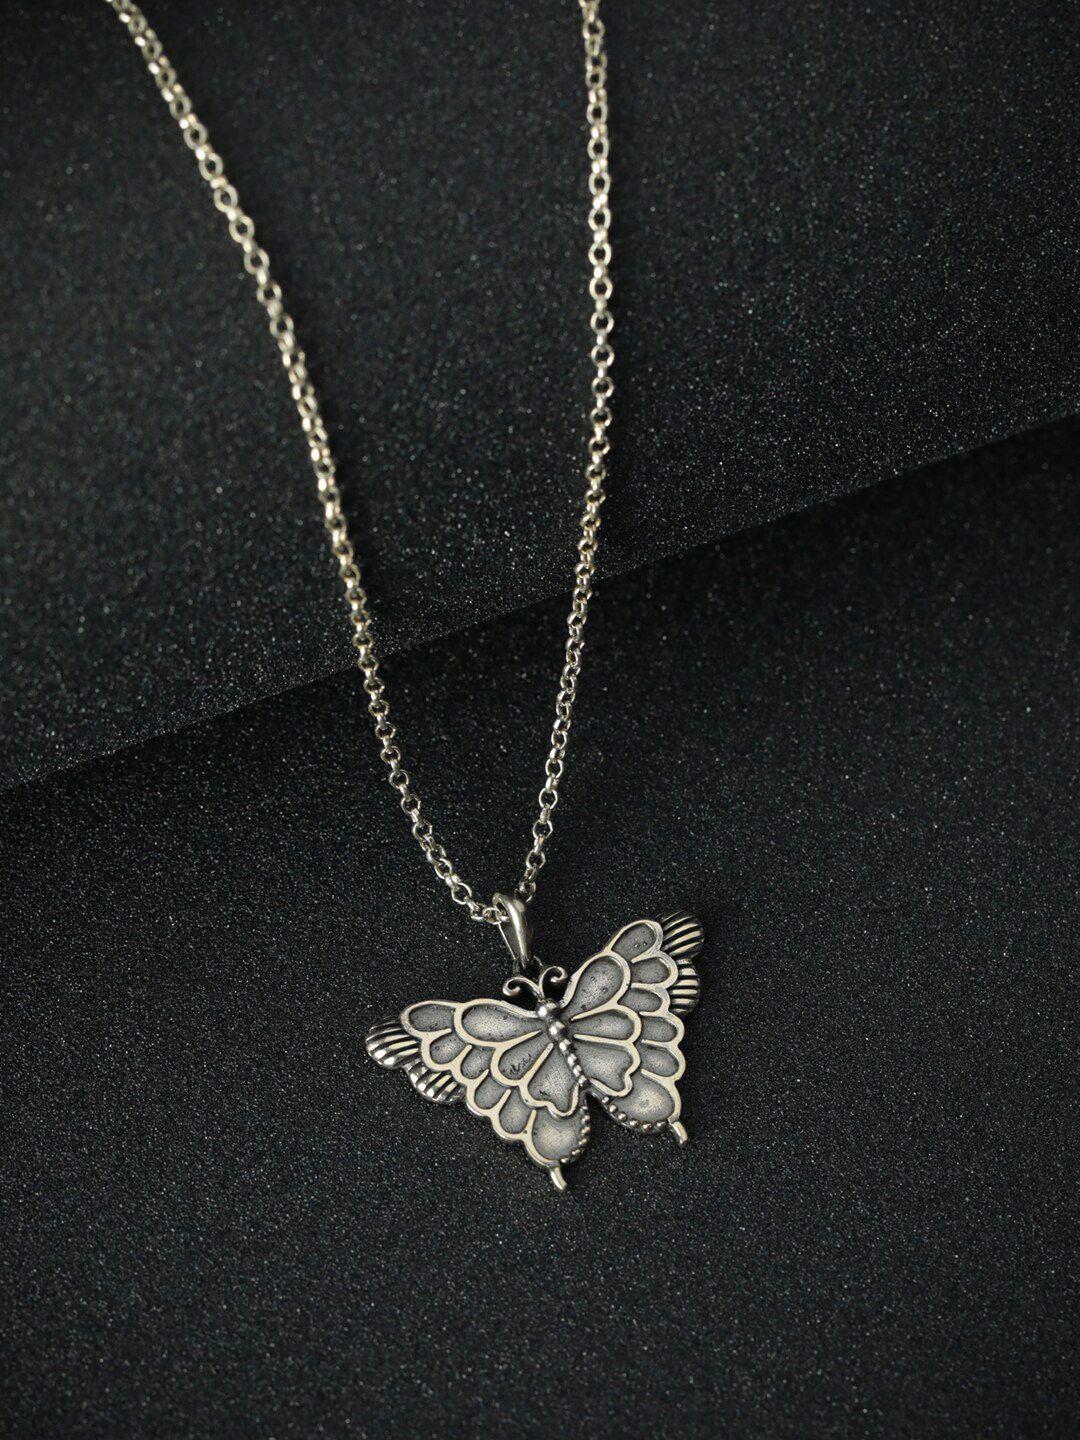 sheer by priyaasi oxidised silver-plated 925 sterling silver butterfly pendant necklace